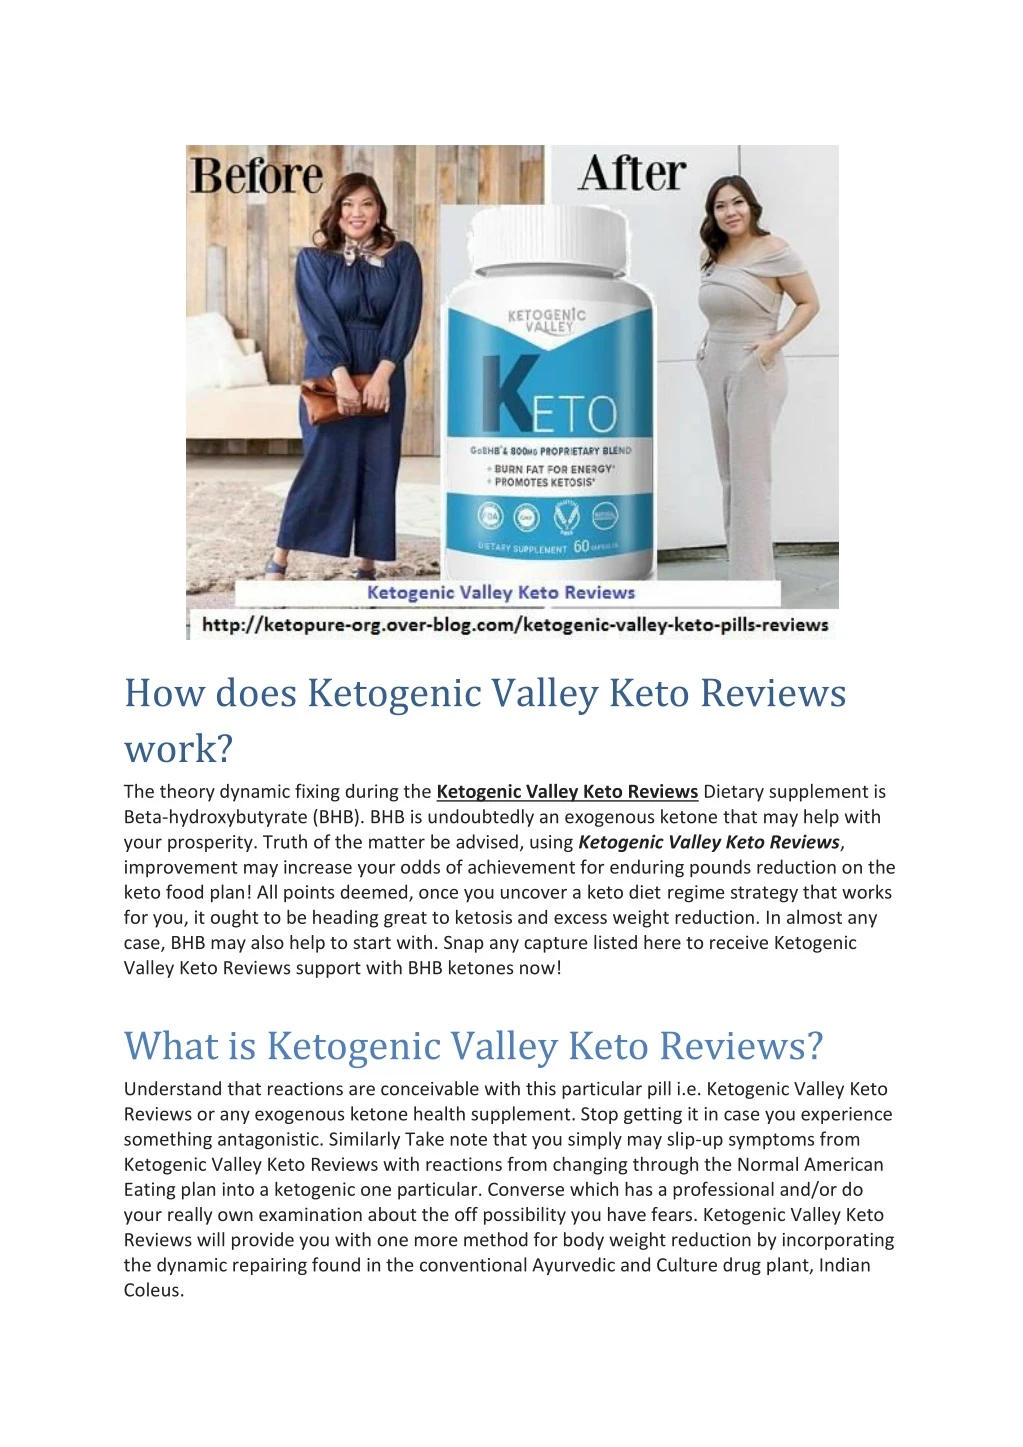 how does ketogenic valley keto reviews work